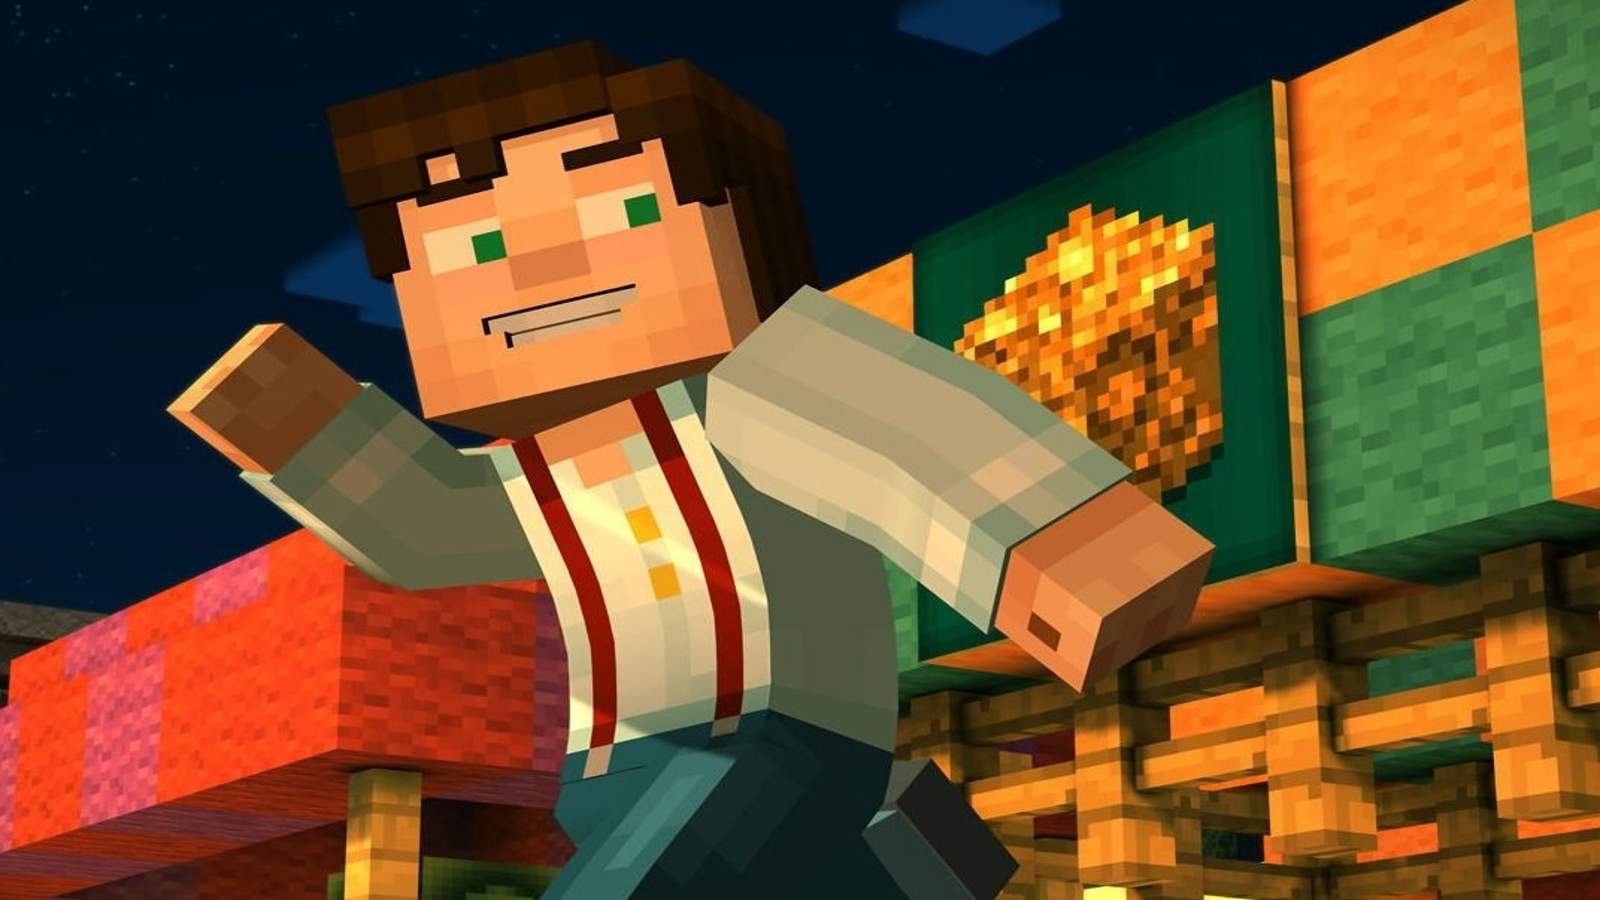 Minecraft: Story Mode is being delisted later this month